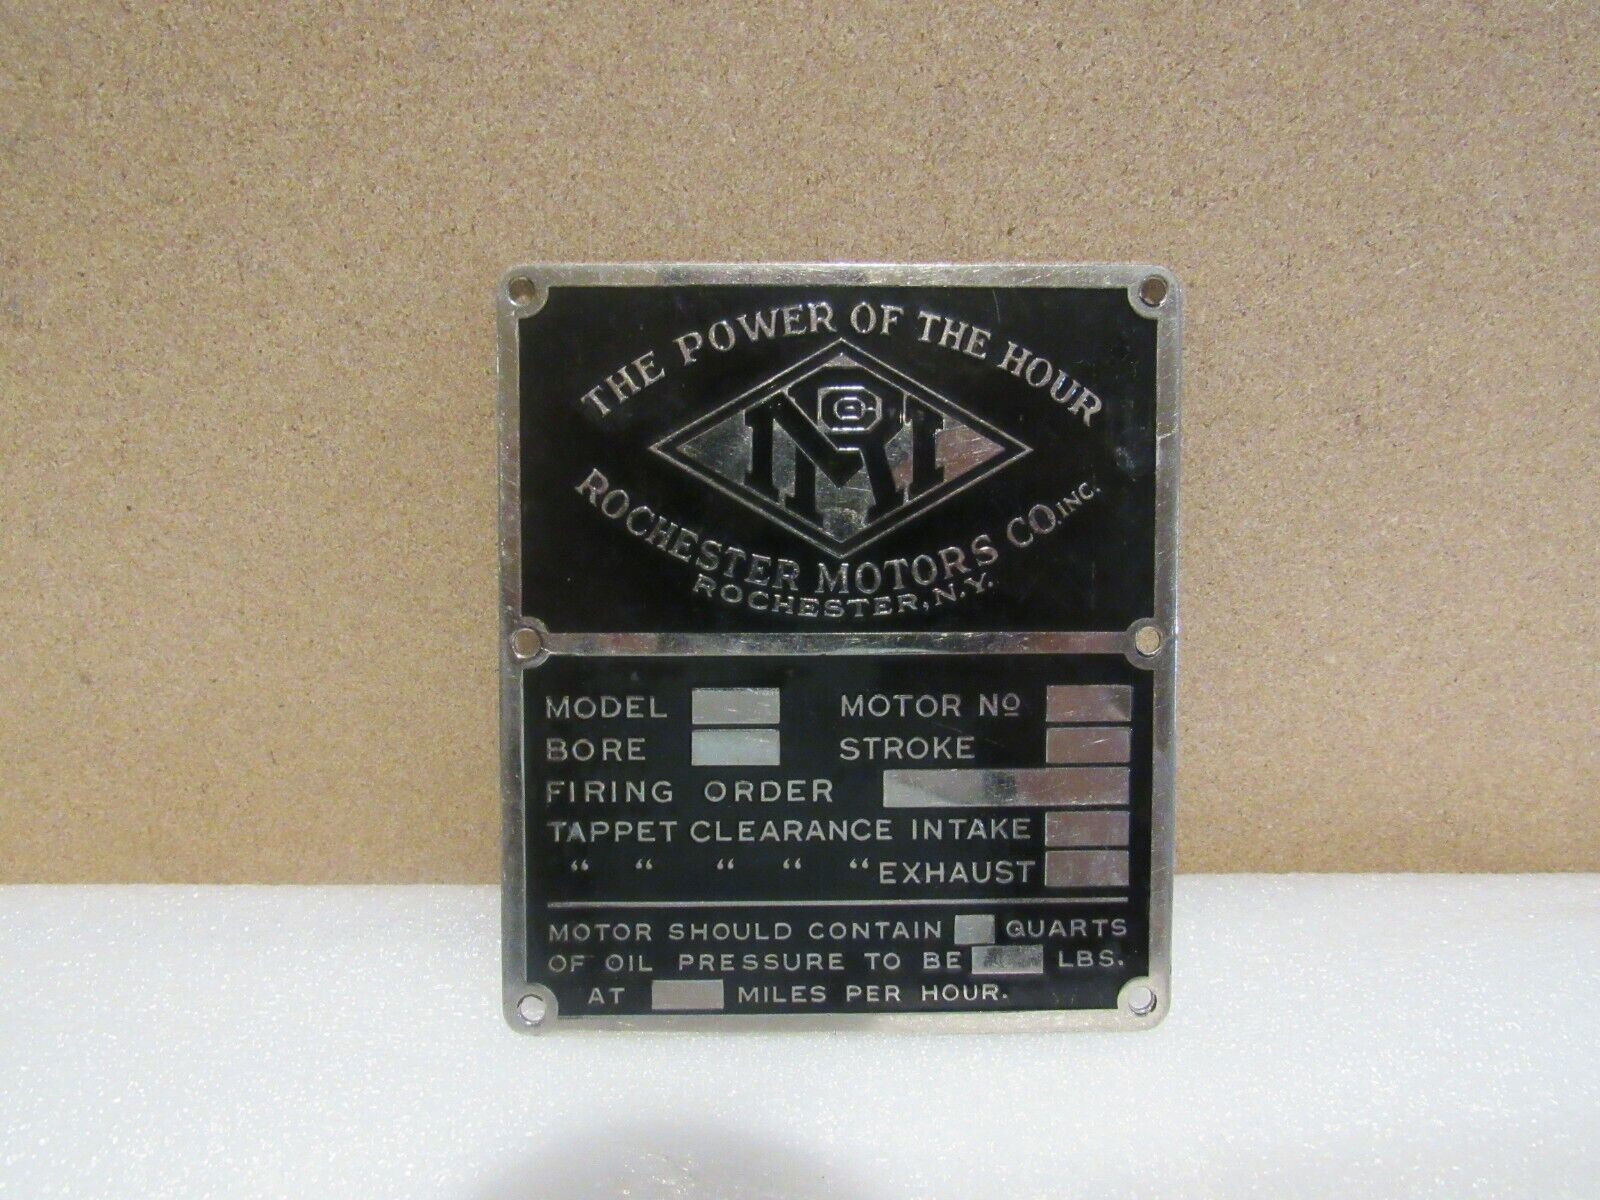 Vintage MRI Specs Plate The Power of the Hour Rochester NY Motors Co Metal